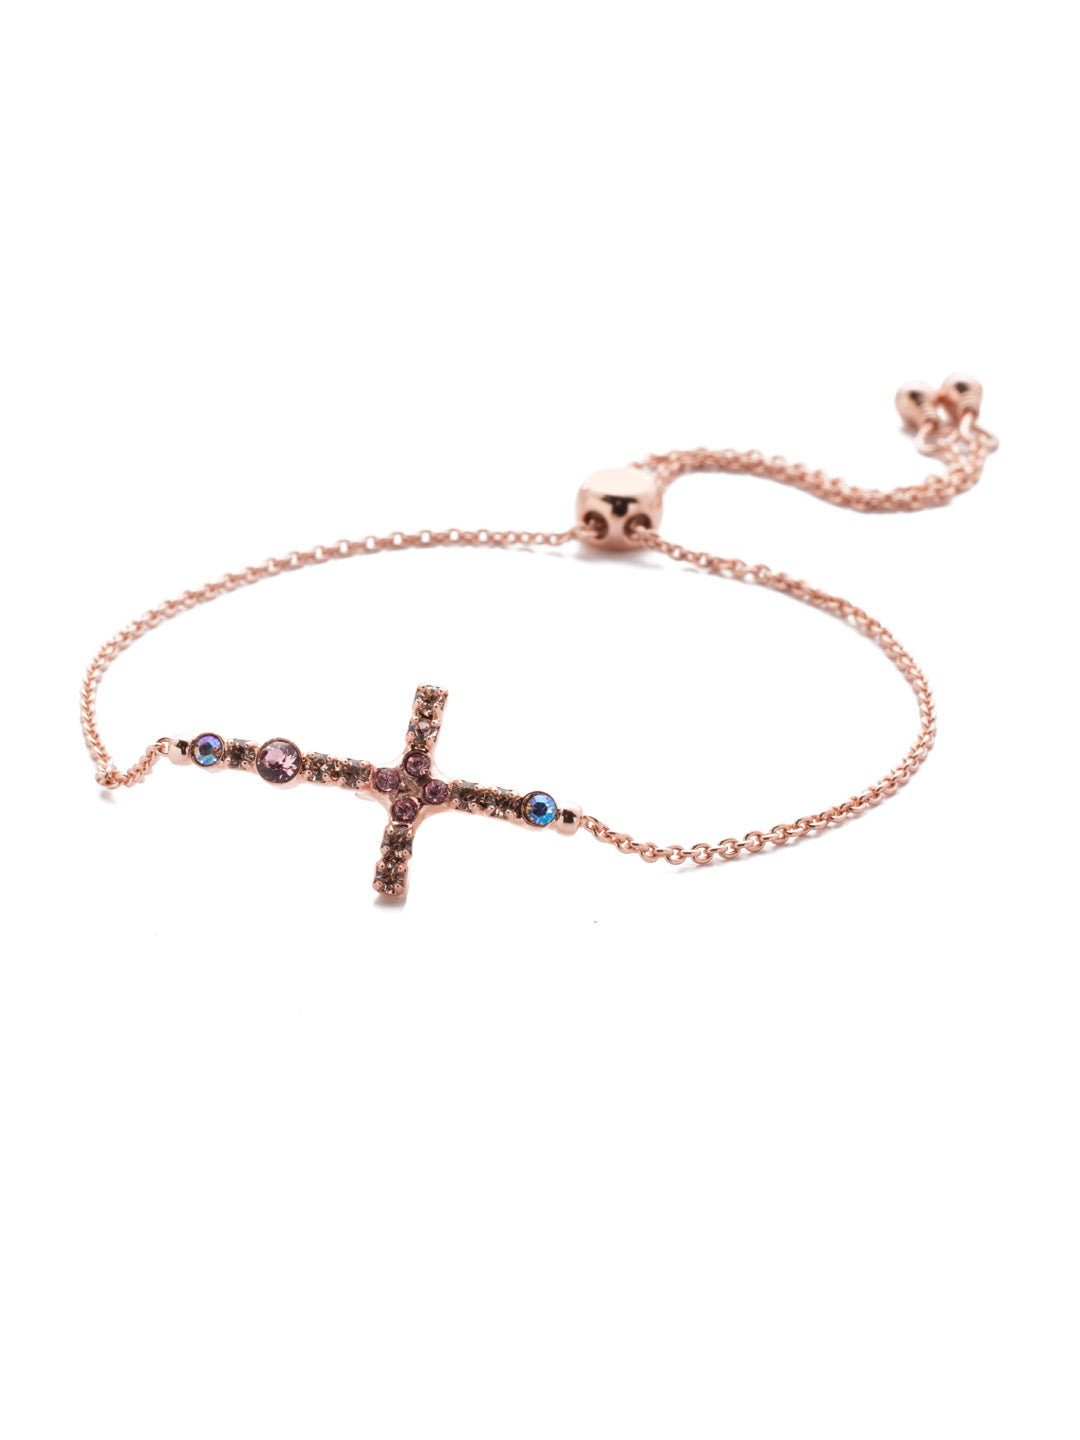 Giovanna Slider Bracelet - BEN1RGLVP - <p>The Giovanna Slider Bracelet features the crystal-encrusted cross fans are looking to slip on. Just adjust to your wrist size and you're set. From Sorrelli's Lavender Peach collection in our Rose Gold-tone finish.</p>